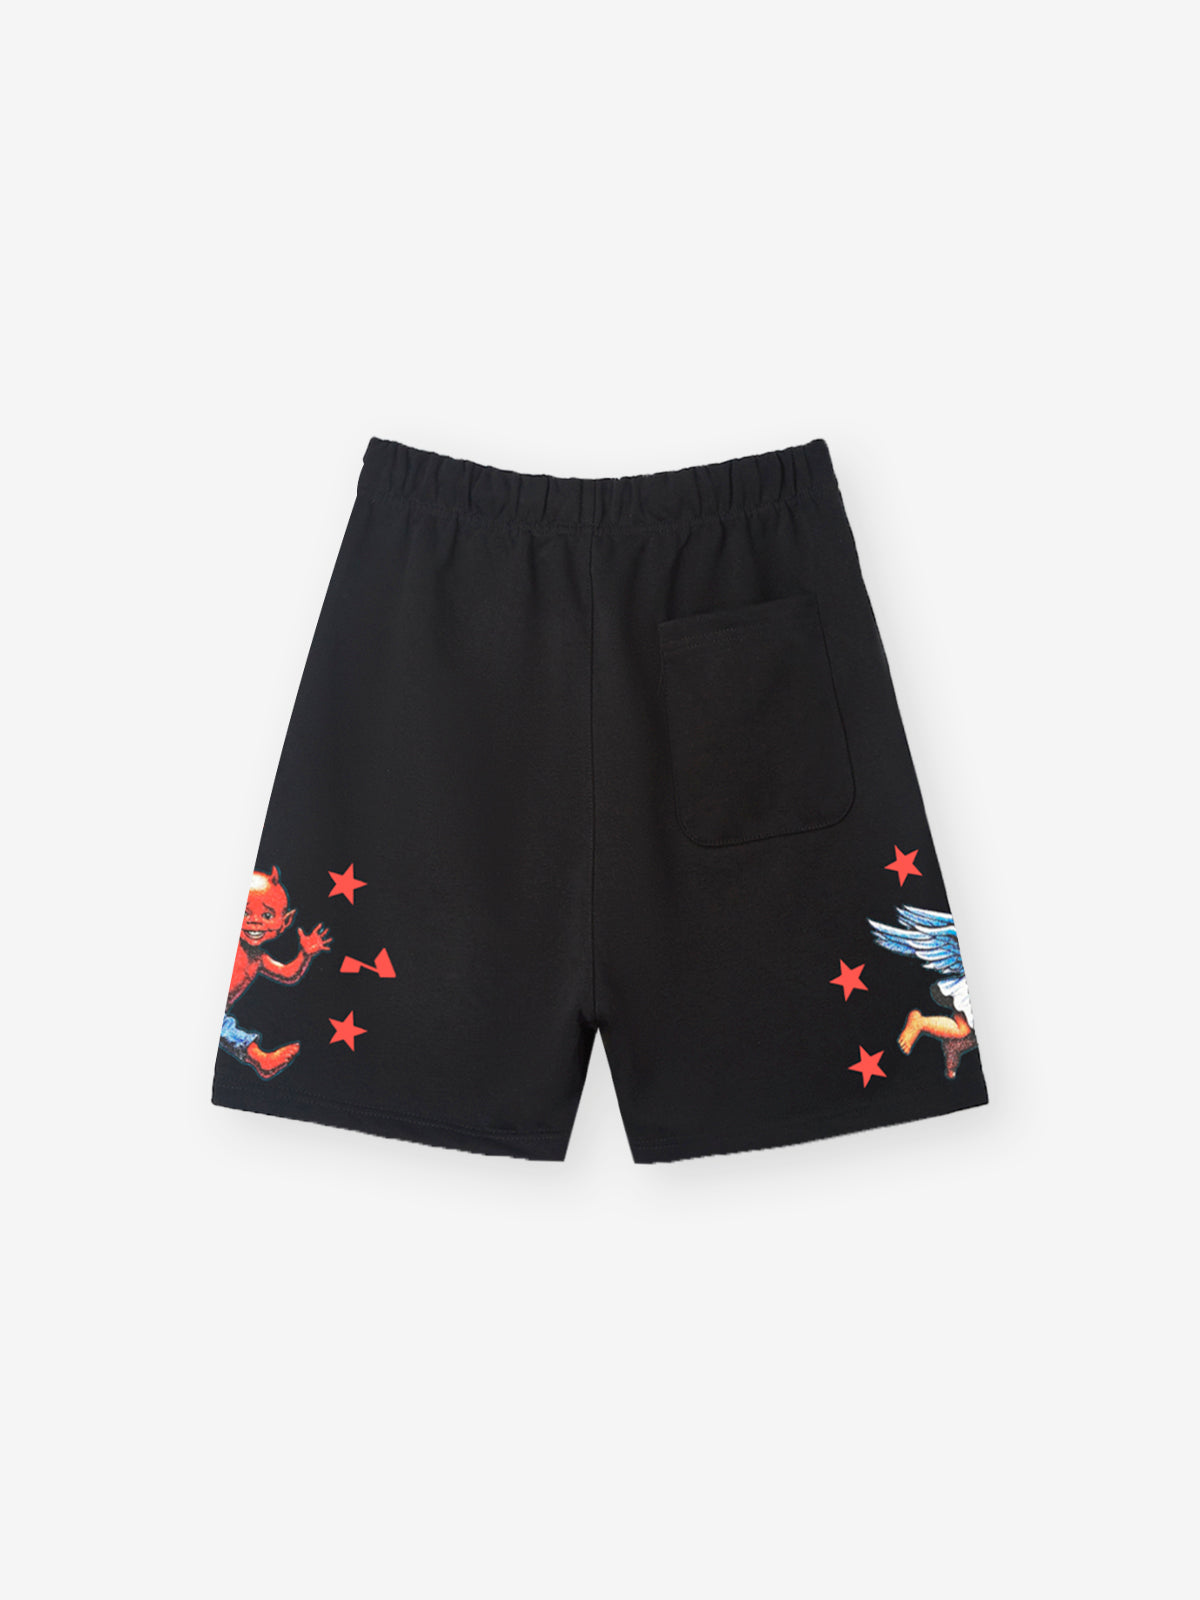 BOUNCE BACK© 450g Heavyweight Breathable Printed Angel Devil Shorts